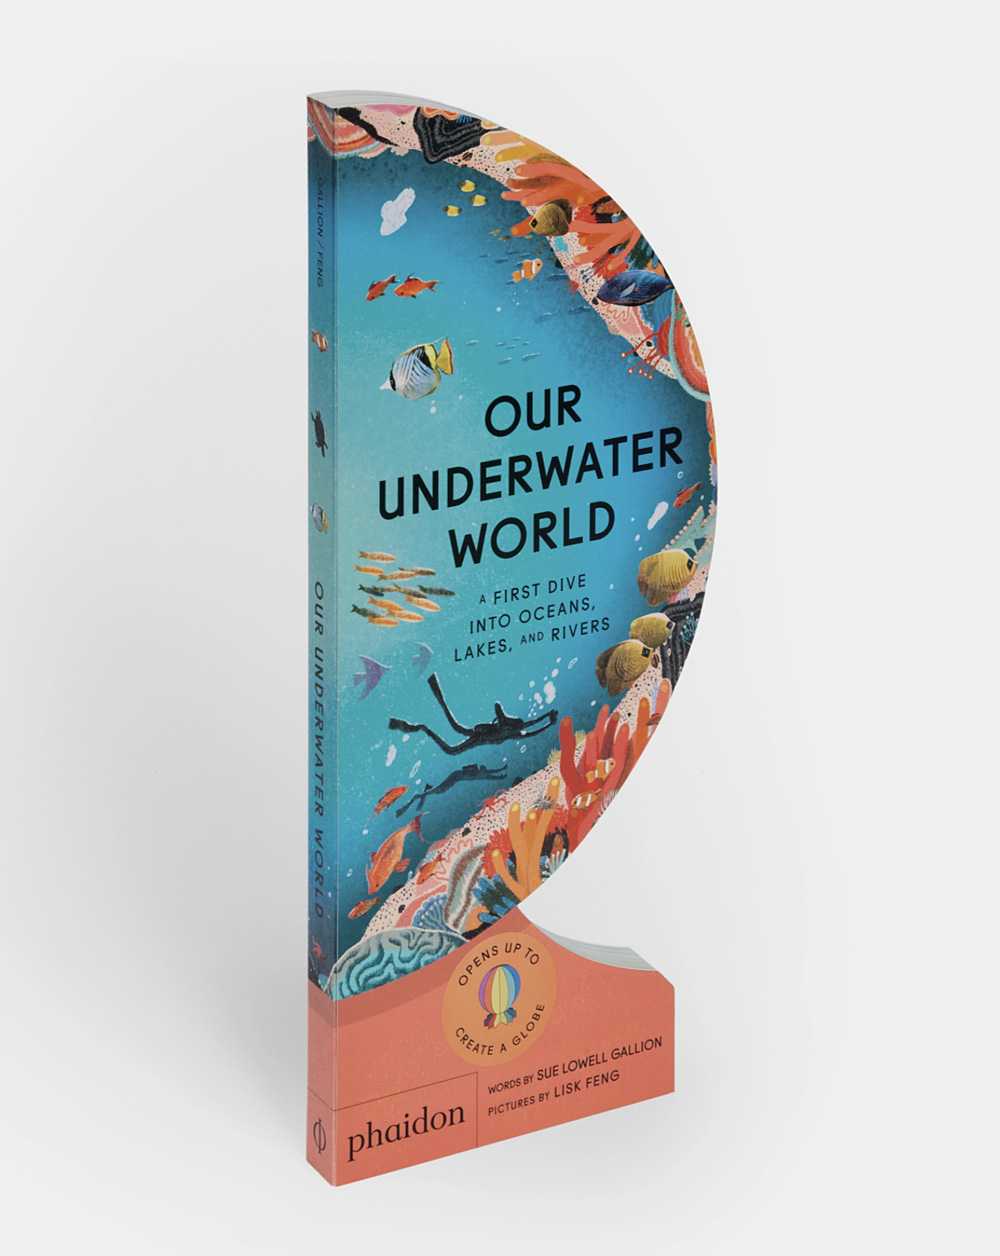 Our Underwater World: A First Dive into Oceans, Lakes, and Rivers